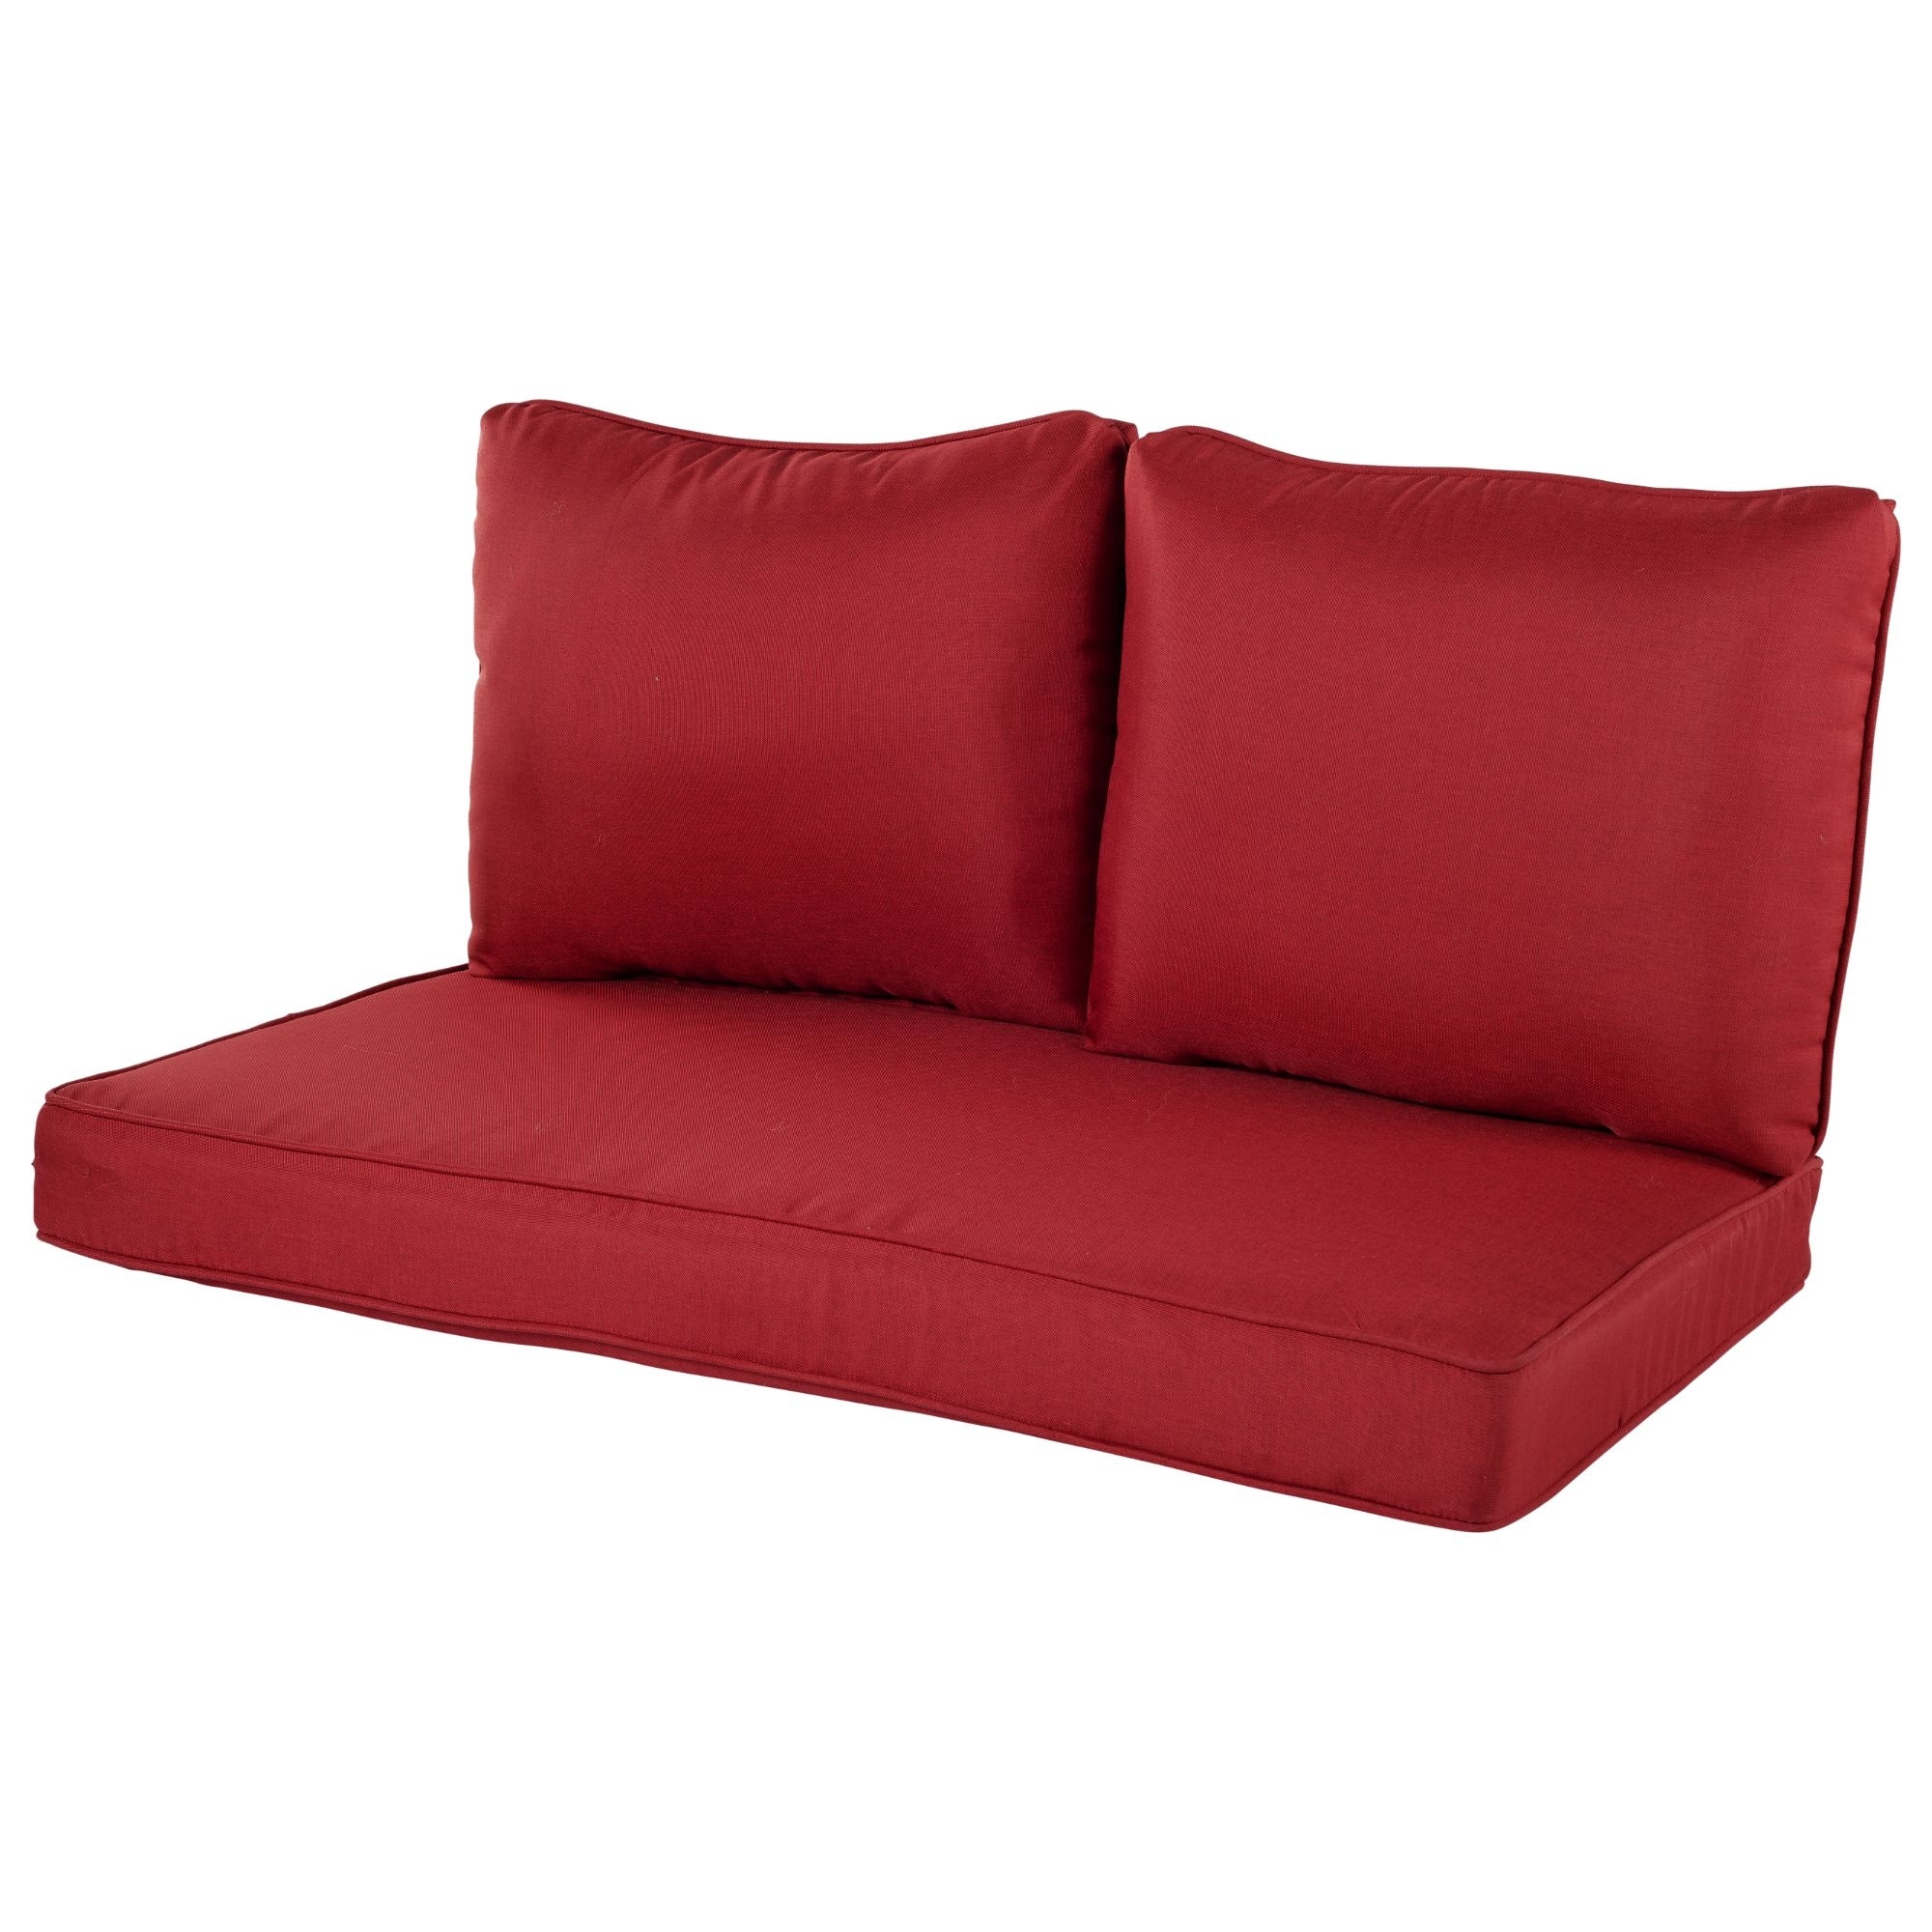 https://ak1.ostkcdn.com/images/products/is/images/direct/5359eda8215eea72bca250f0a2e4c06bee416a2b/Haven-Way-Loveseat-Cushion-Set.jpg